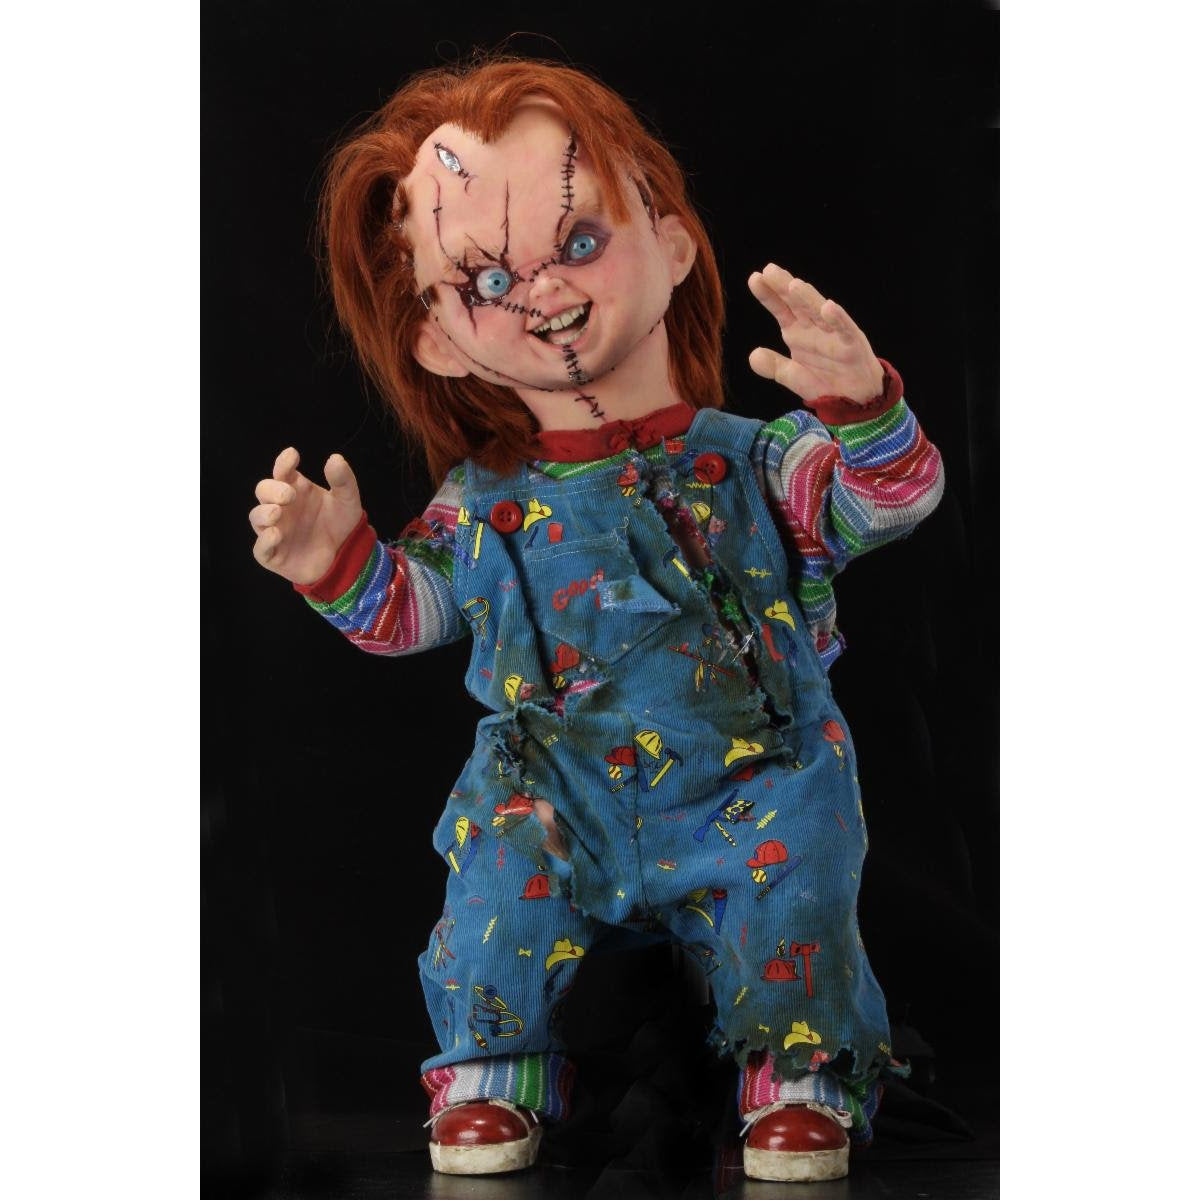 chucky's bride doll for sale